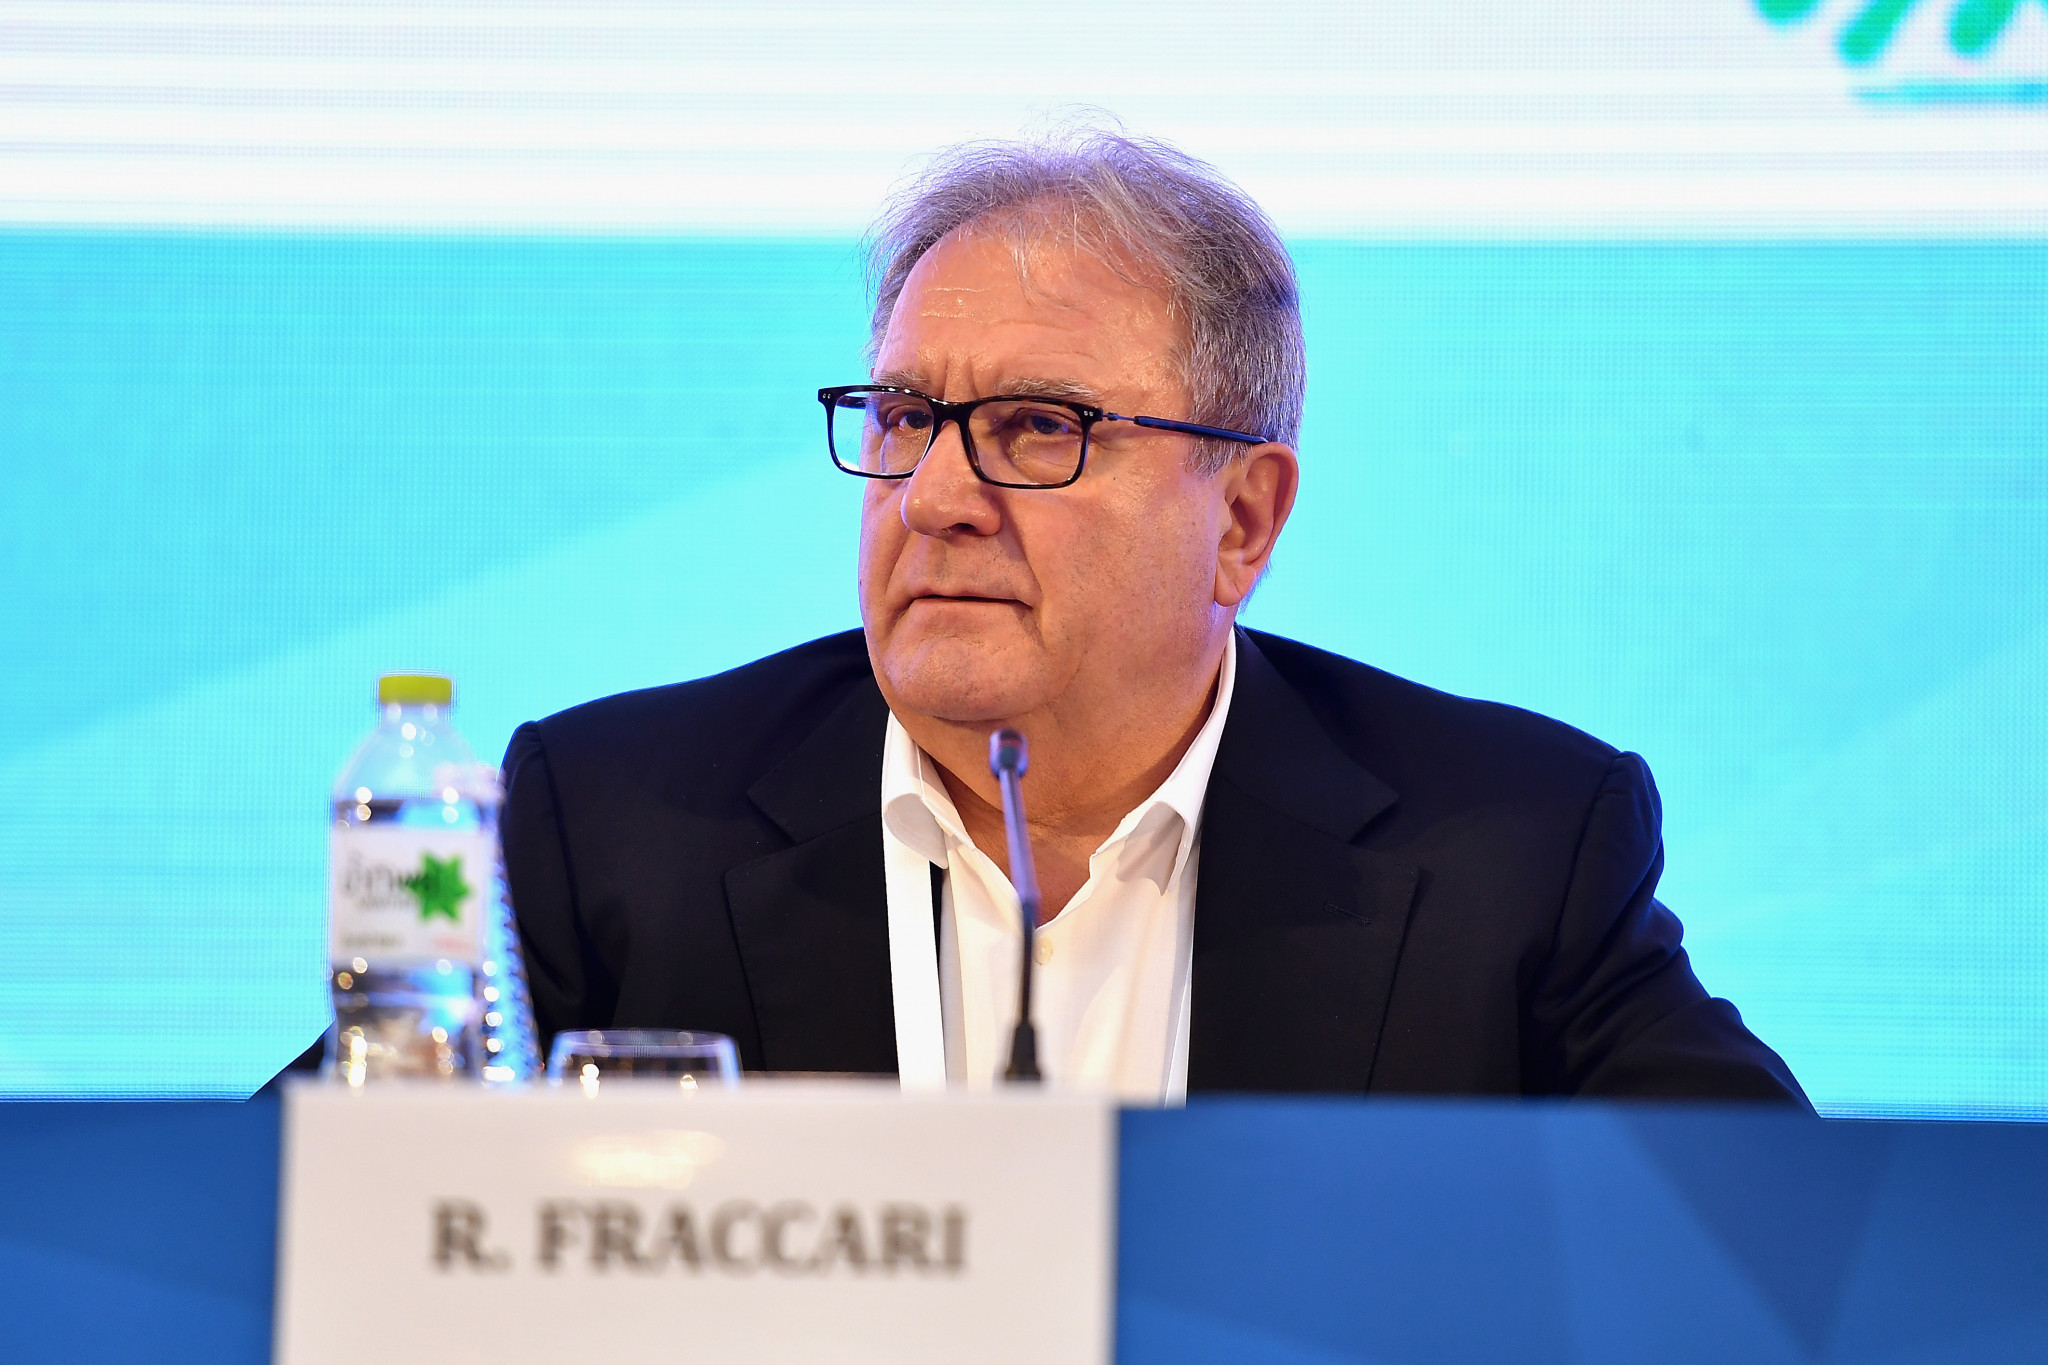 WBSC President Fraccari says 2019 will be biggest year ever for baseball and softball